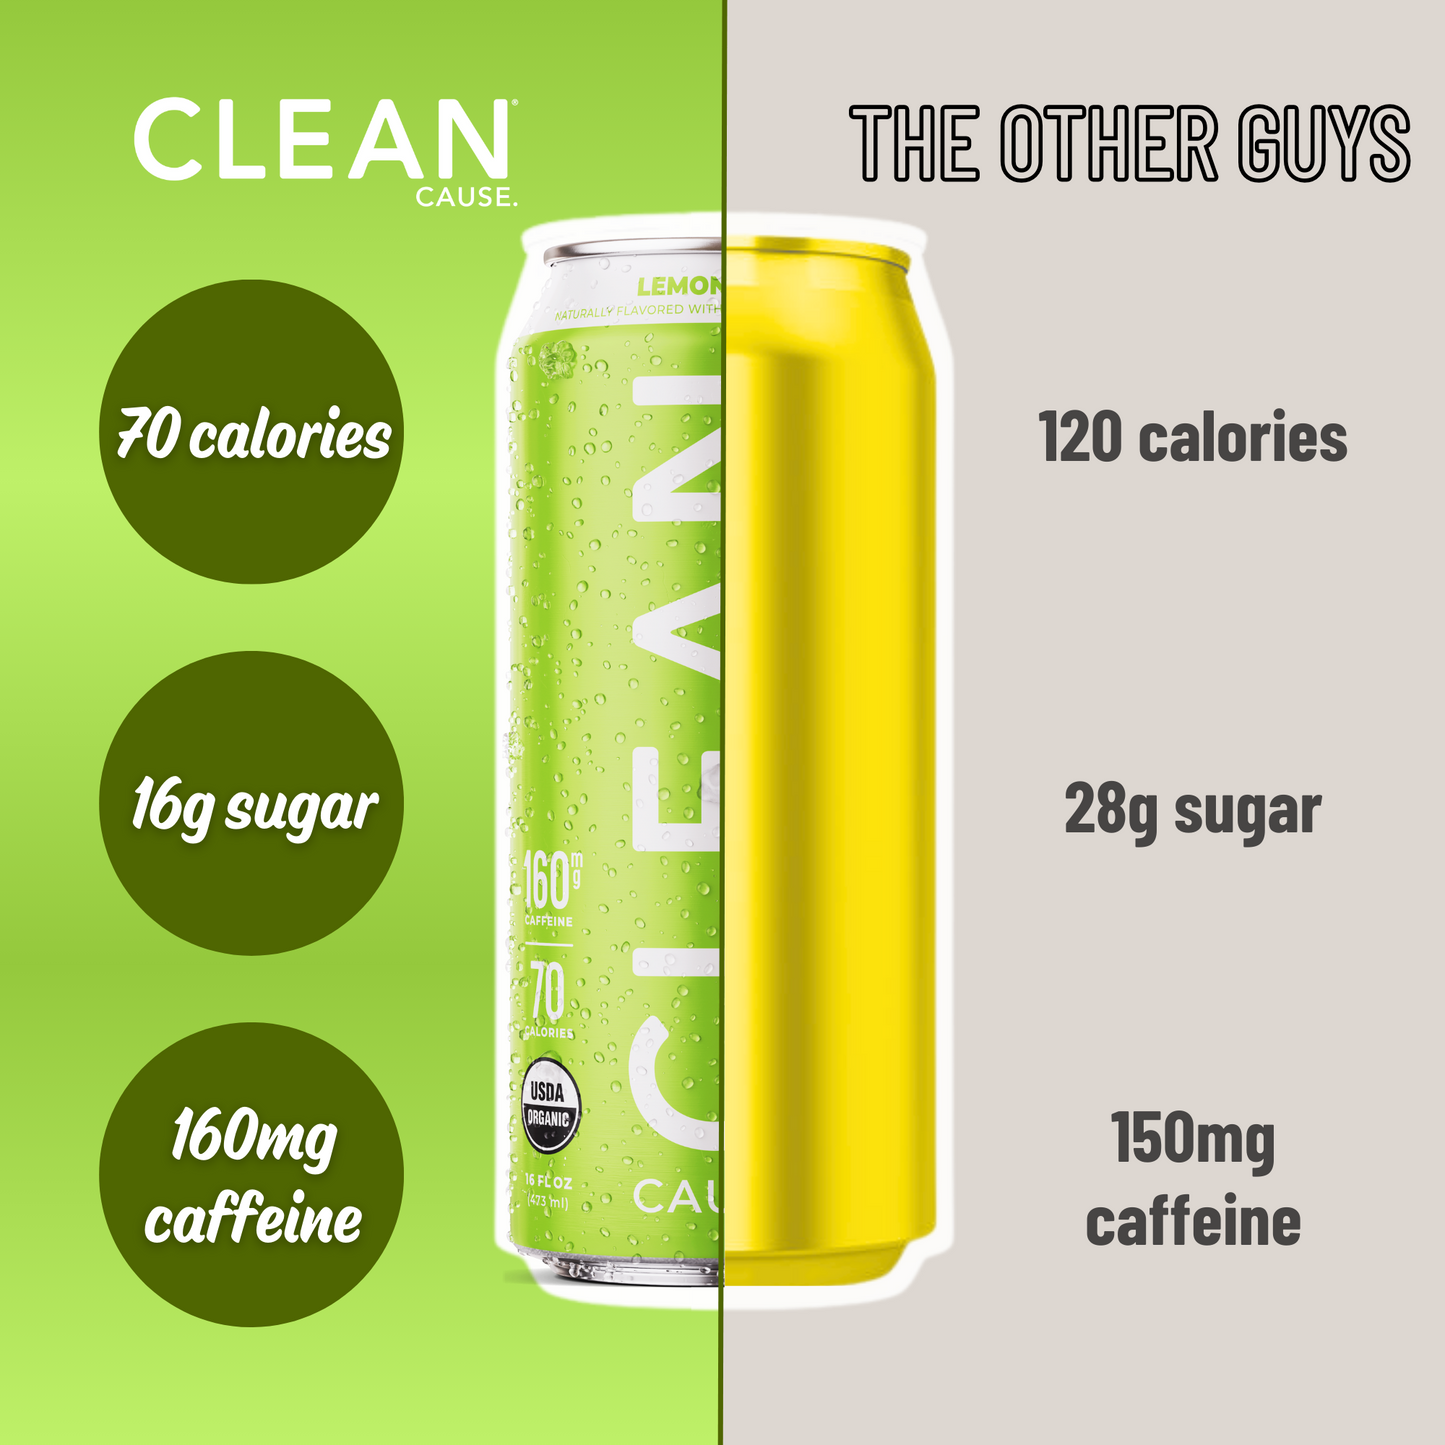 A can split between CLEAN Lemon Lime Yerba Mate and "The Other Guys" showing CLEAN with 70 calories, 16g sugar, and 160mg caffeine and the other guys with 120 calories, 28g sugar, and 150mg caffeine